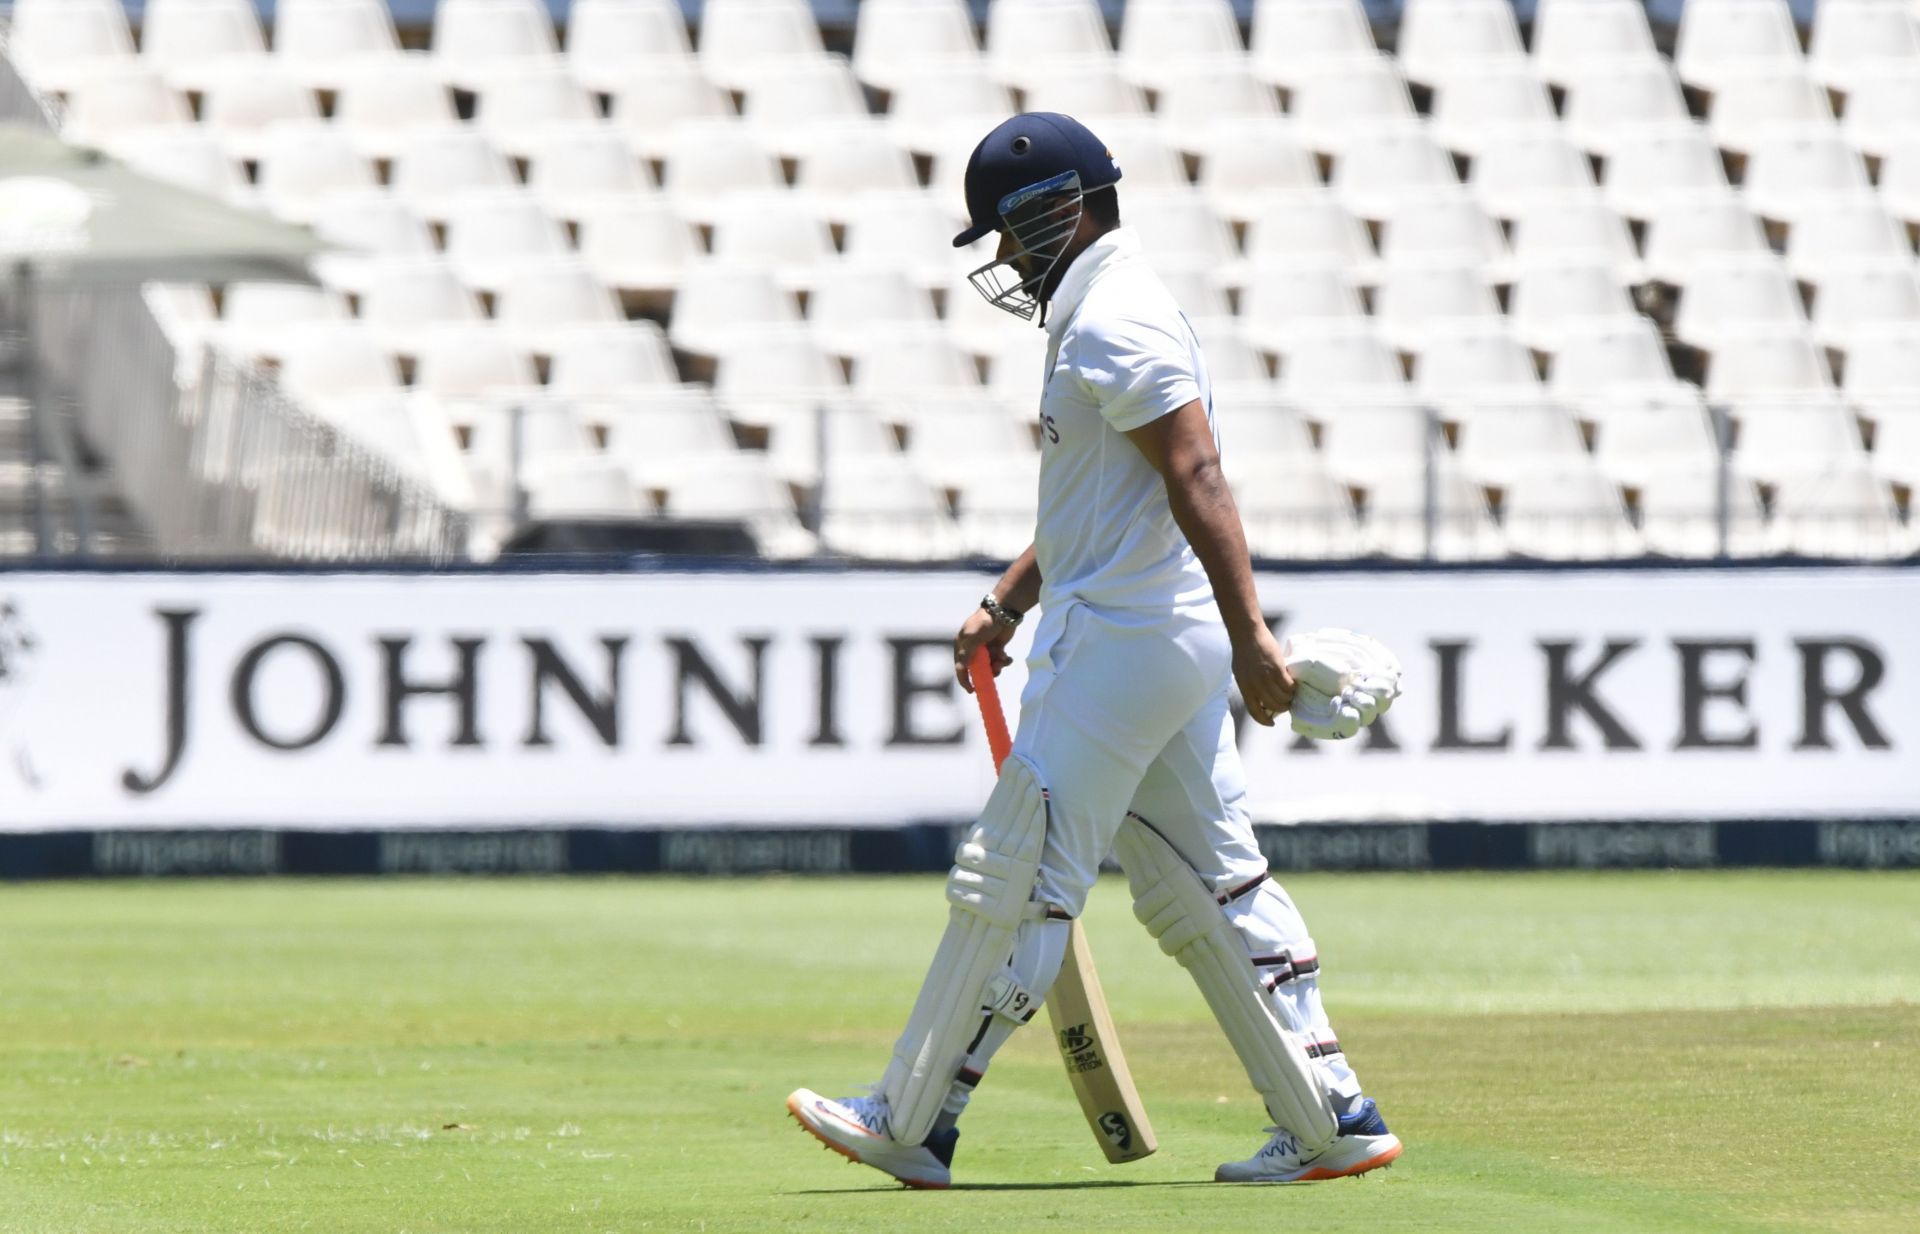 Aakash Chopra was critical of the shot played by Rishabh Pant